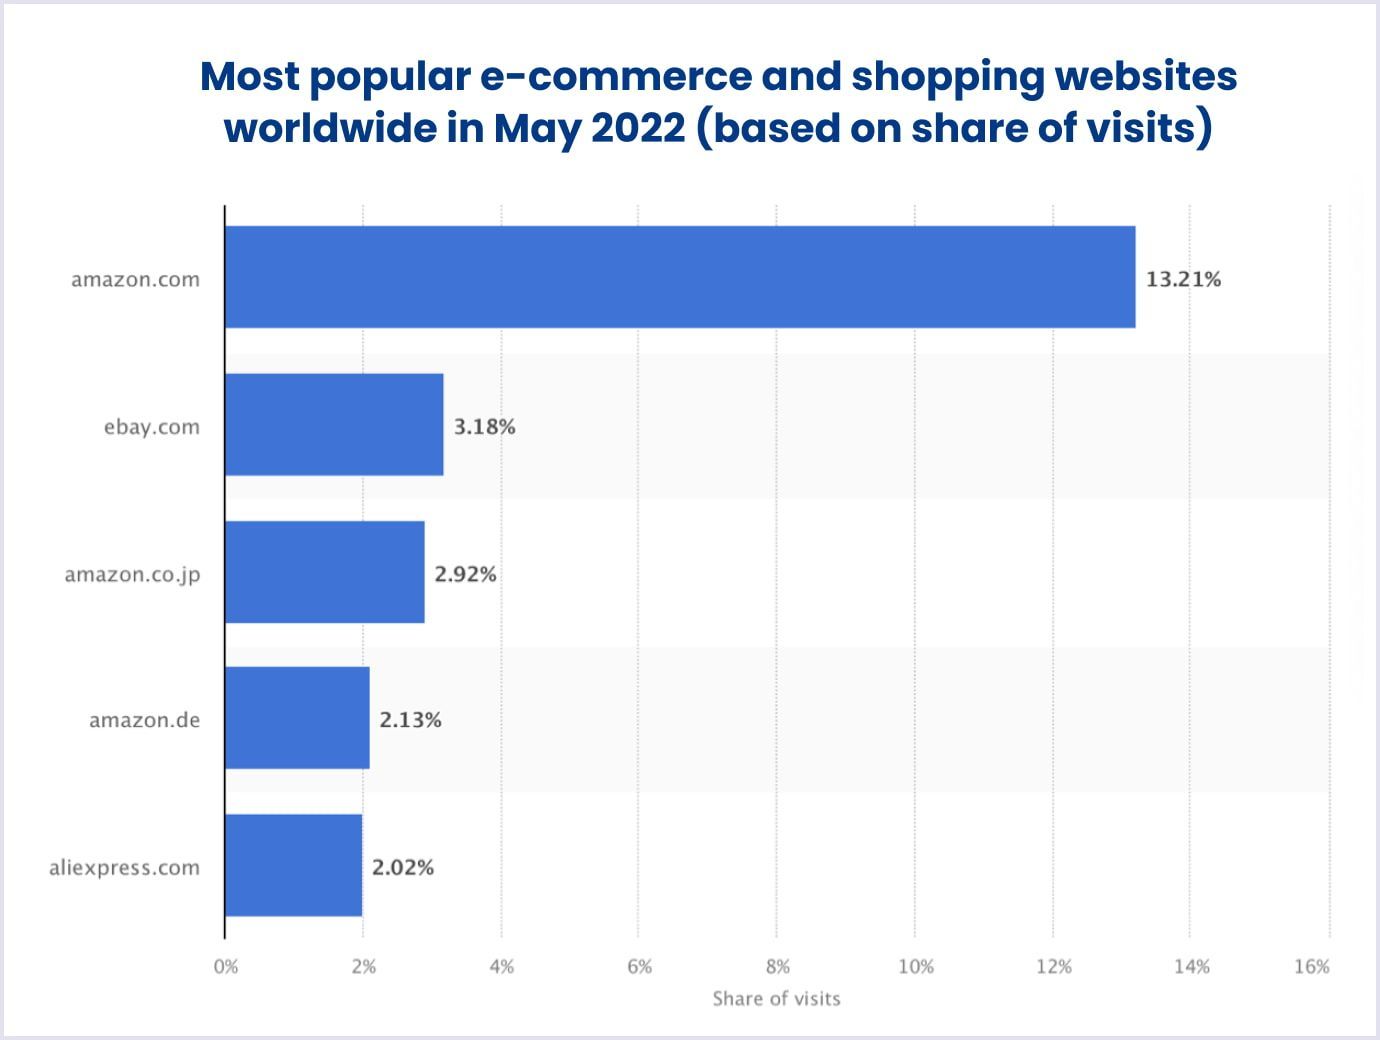 eBay is one of the most popular e-commerce websites worldwide in 2022